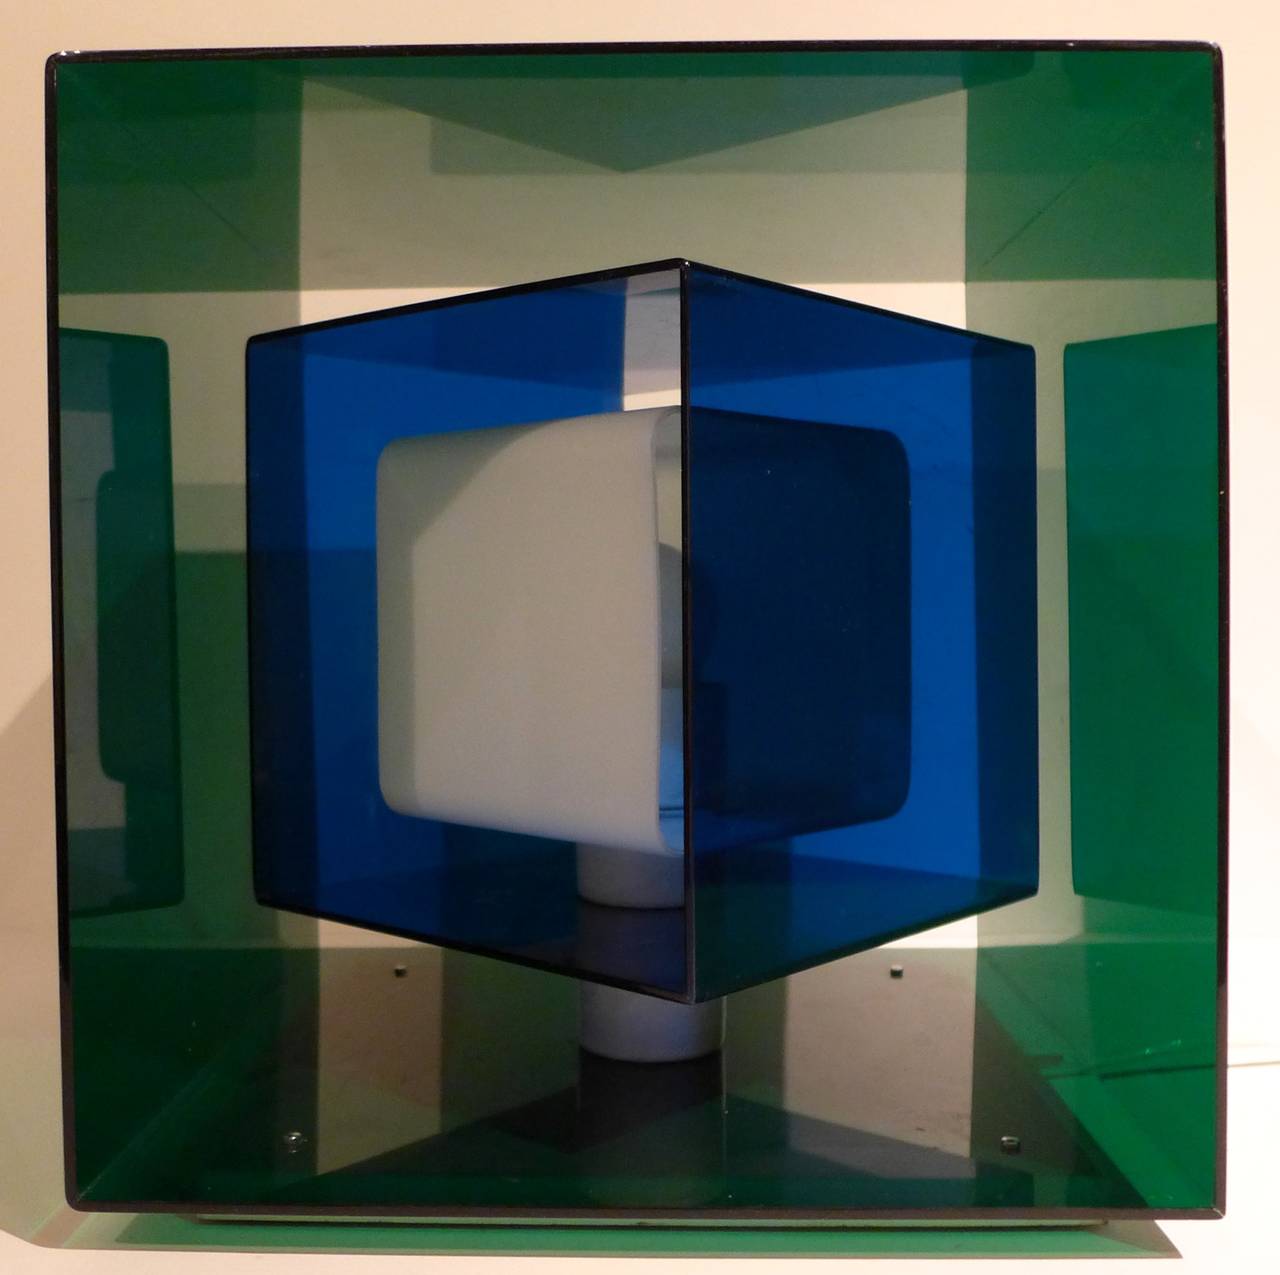 Table lamp consisting of three concentric cubes, the outer two of acrylic and the inner one of opaline glass, on a metal base plate. Made in small numbers by Stilnovo, Italy, circa 1970. The inner two cubes can rotate to provide different visual